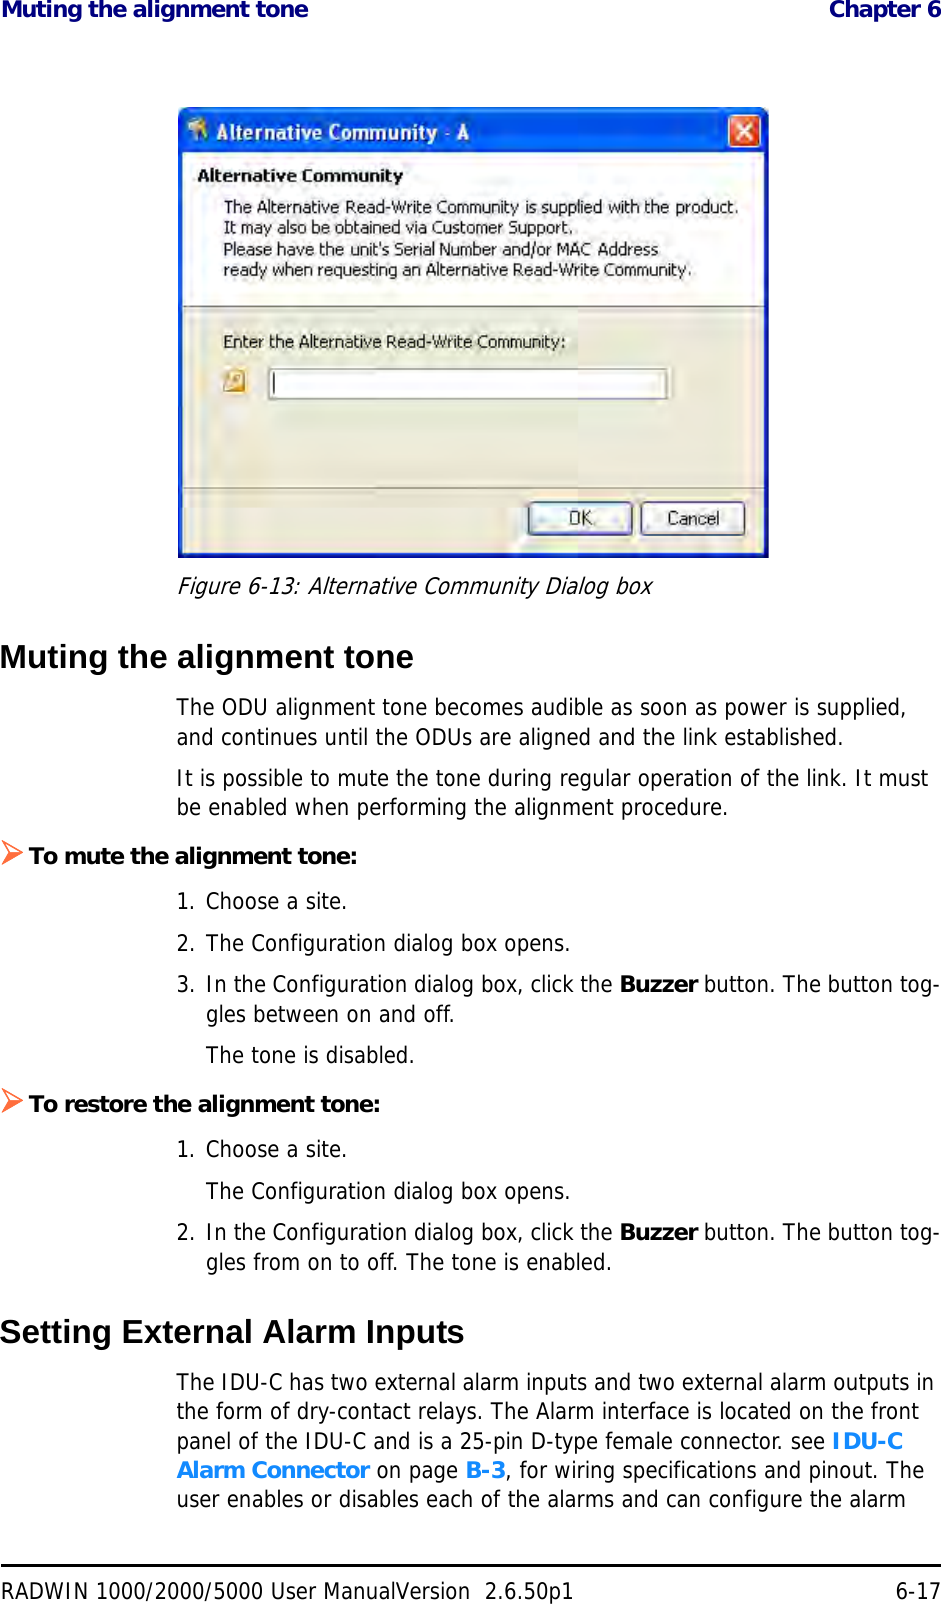 Muting the alignment tone  Chapter 6RADWIN 1000/2000/5000 User ManualVersion  2.6.50p1 6-17Figure 6-13: Alternative Community Dialog boxMuting the alignment toneThe ODU alignment tone becomes audible as soon as power is supplied, and continues until the ODUs are aligned and the link established.It is possible to mute the tone during regular operation of the link. It must be enabled when performing the alignment procedure.To mute the alignment tone:1. Choose a site.2. The Configuration dialog box opens.3. In the Configuration dialog box, click the Buzzer button. The button tog-gles between on and off.The tone is disabled.To restore the alignment tone:1. Choose a site.The Configuration dialog box opens.2. In the Configuration dialog box, click the Buzzer button. The button tog-gles from on to off. The tone is enabled.Setting External Alarm InputsThe IDU-C has two external alarm inputs and two external alarm outputs in the form of dry-contact relays. The Alarm interface is located on the front panel of the IDU-C and is a 25-pin D-type female connector. see IDU-C Alarm Connector on page B-3, for wiring specifications and pinout. The user enables or disables each of the alarms and can configure the alarm 